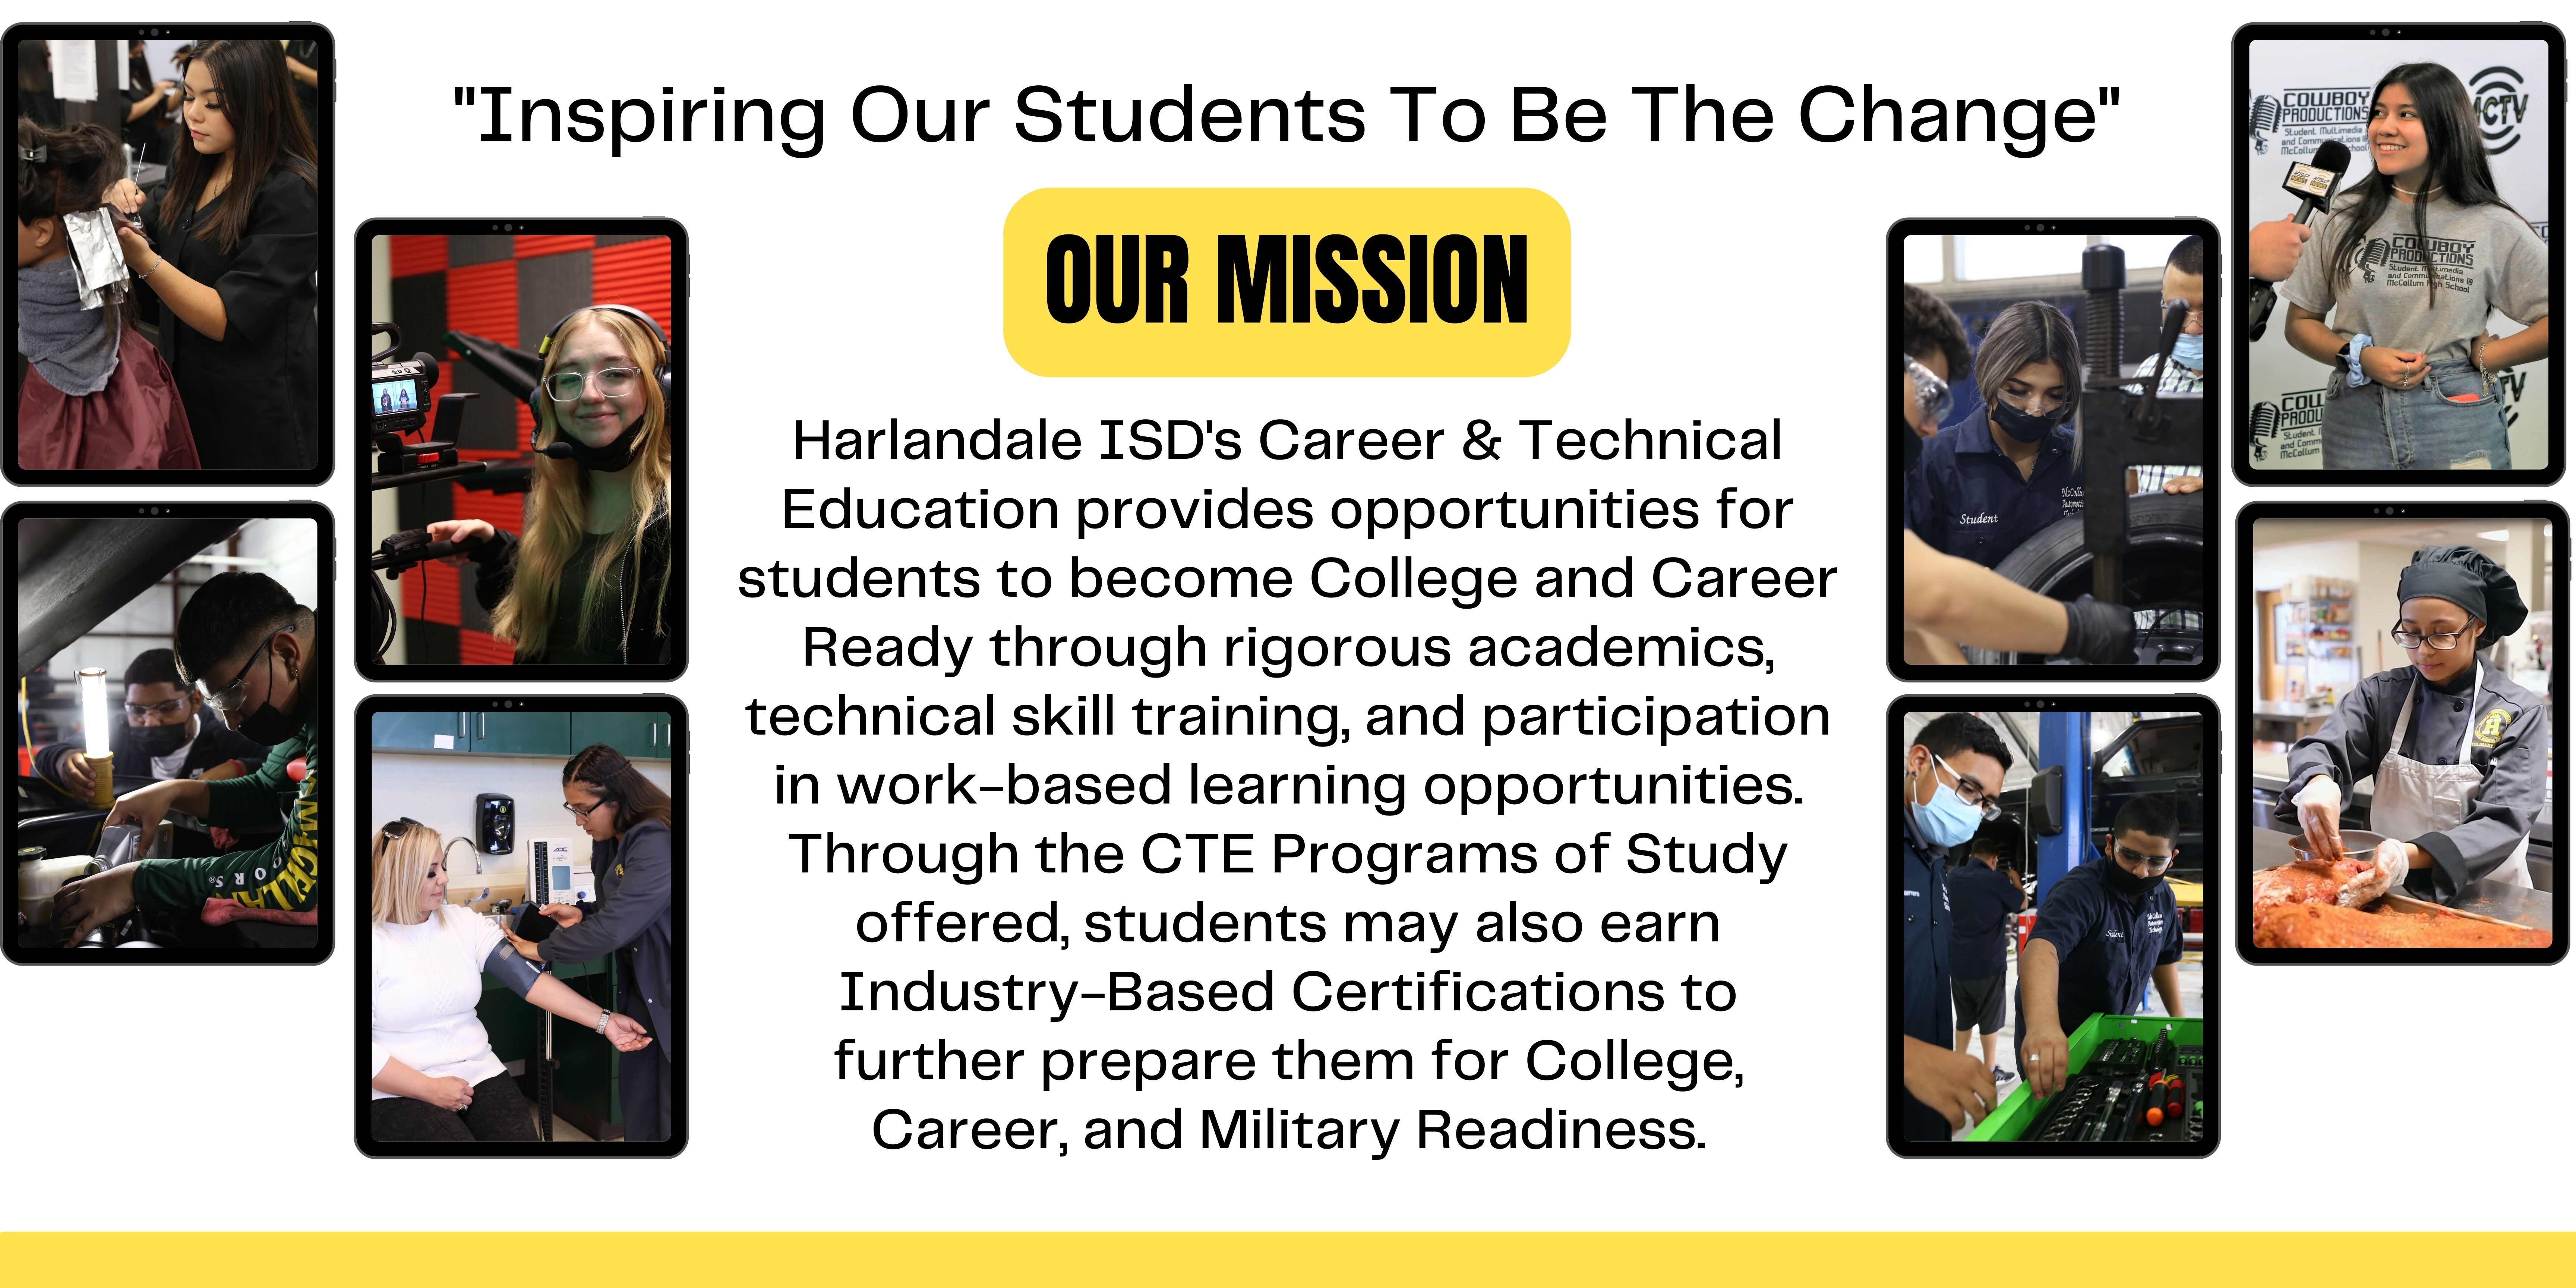 Our Mission: Harlandale ISD's Career & Technical Education provides opportunities for students to become College and Career Ready through rigorous academics, technical skill training, and participation in work-based learning opportunities. Through the CTE Programs of Study offered, students may also earn Industry-Based Certifications to further prepare them for College, Career, and Military Readiness.